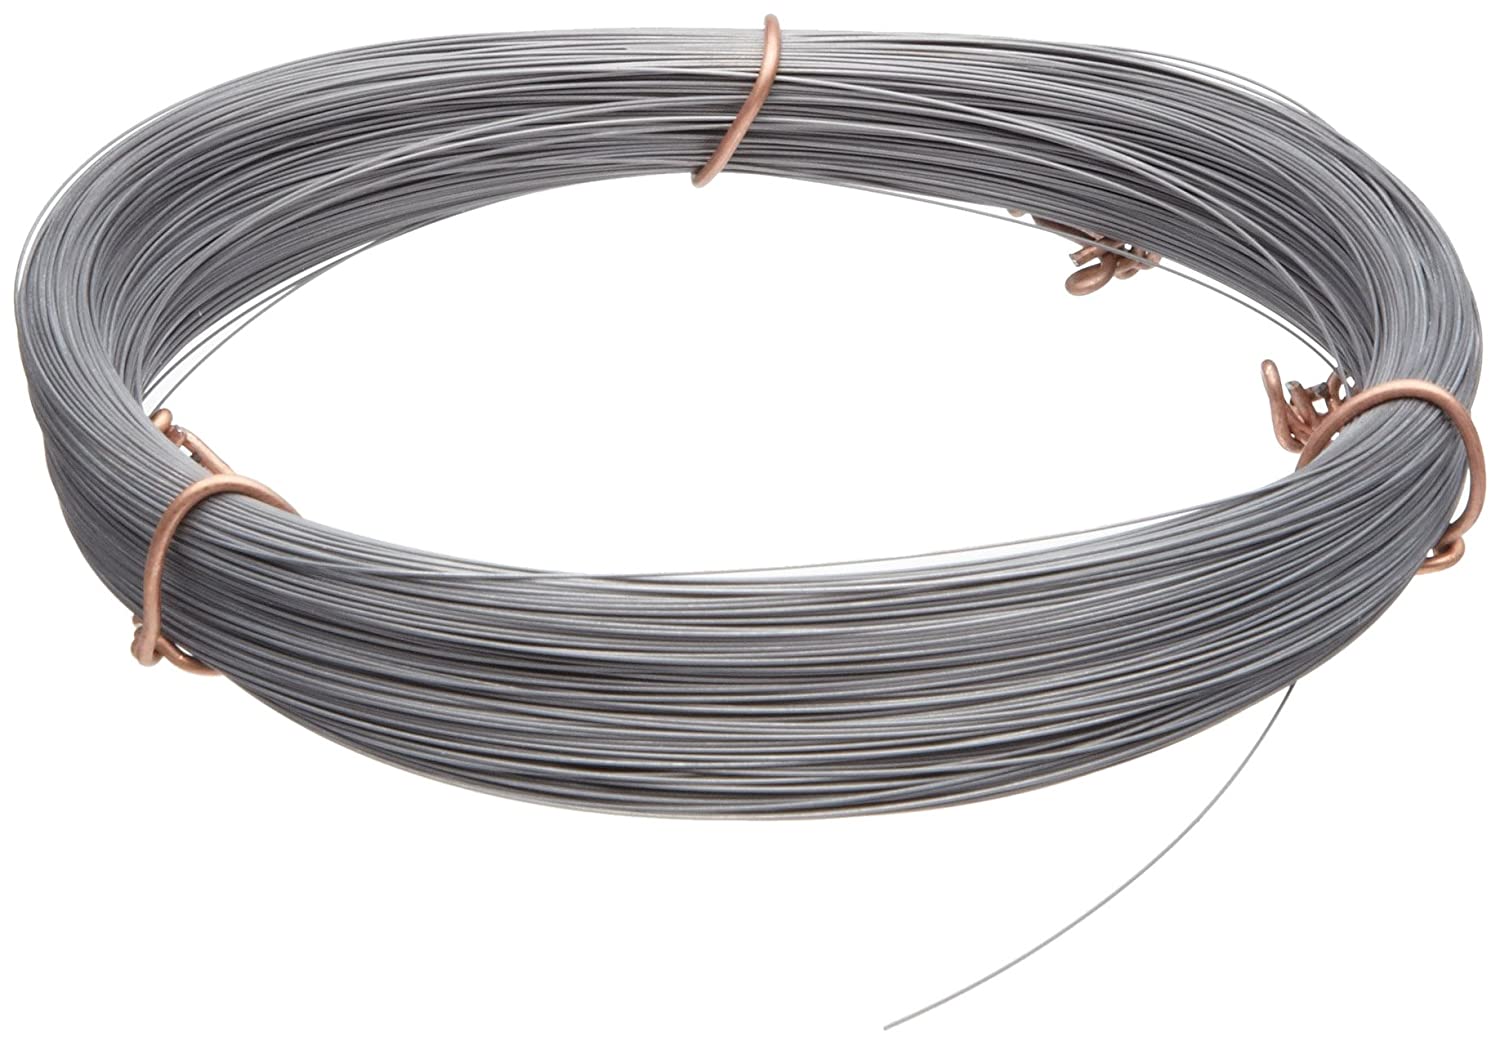 Piano Wire-High Carbon Steel Wire for Piano Strings 24 gauge to 6